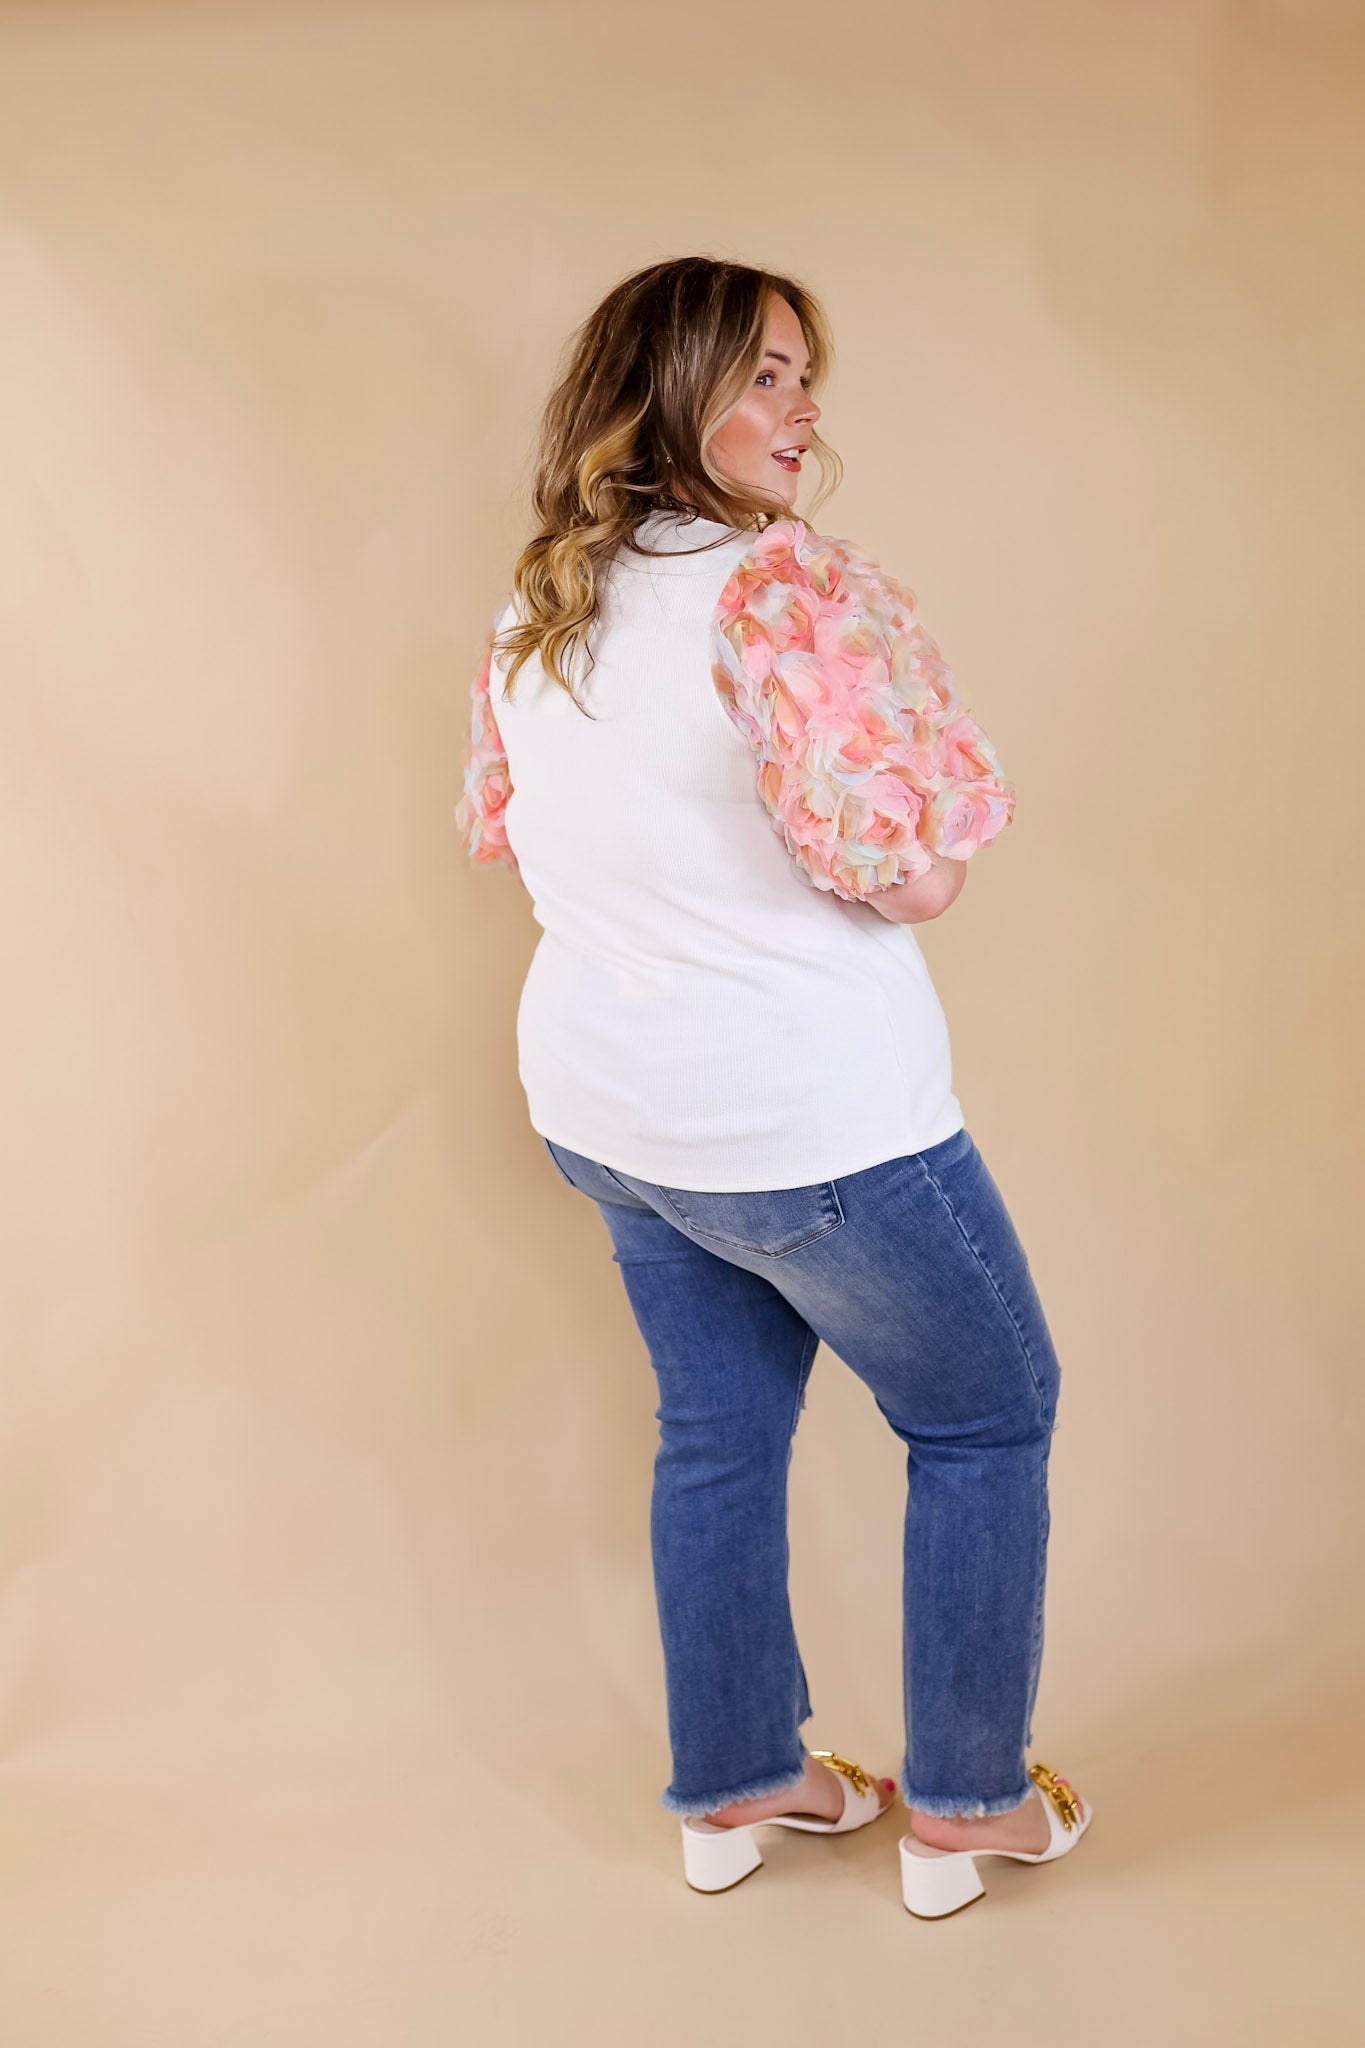 Spring Girls Multi-Color Floral Tulle Balloon Sleeve Top in White - Giddy Up Glamour Boutique